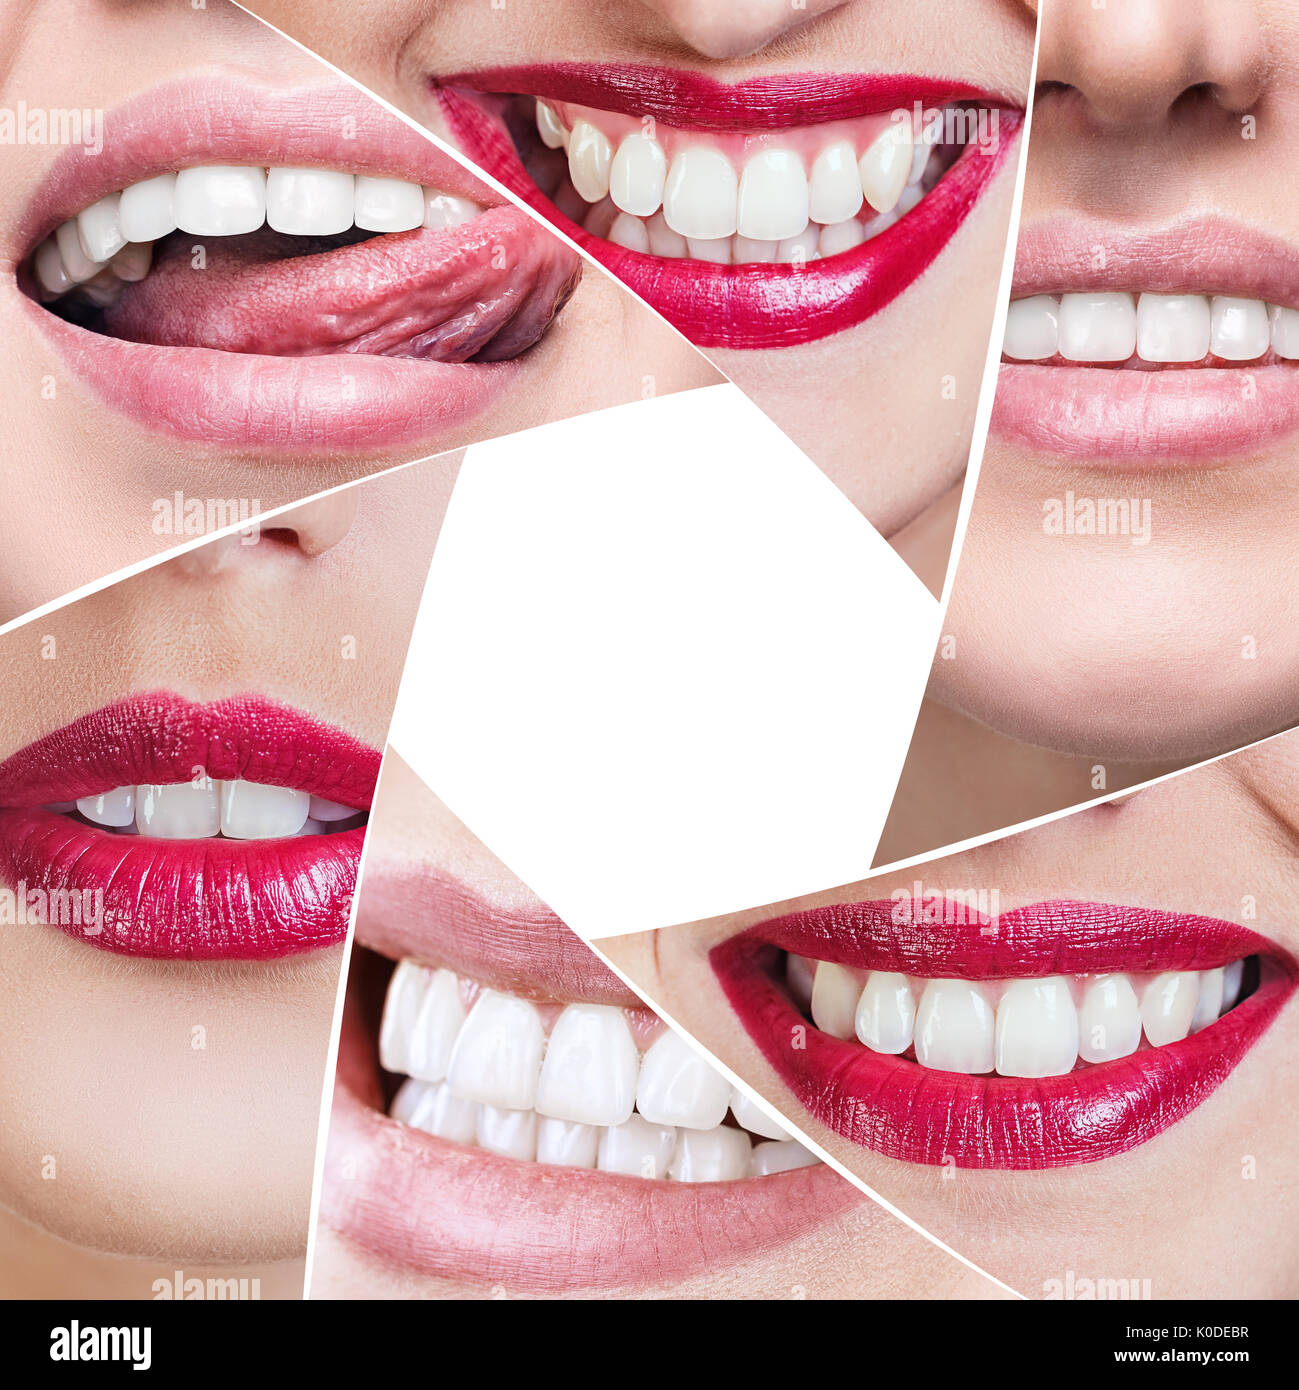 Collage of healthy smile in diaphragm shape. Stock Photo